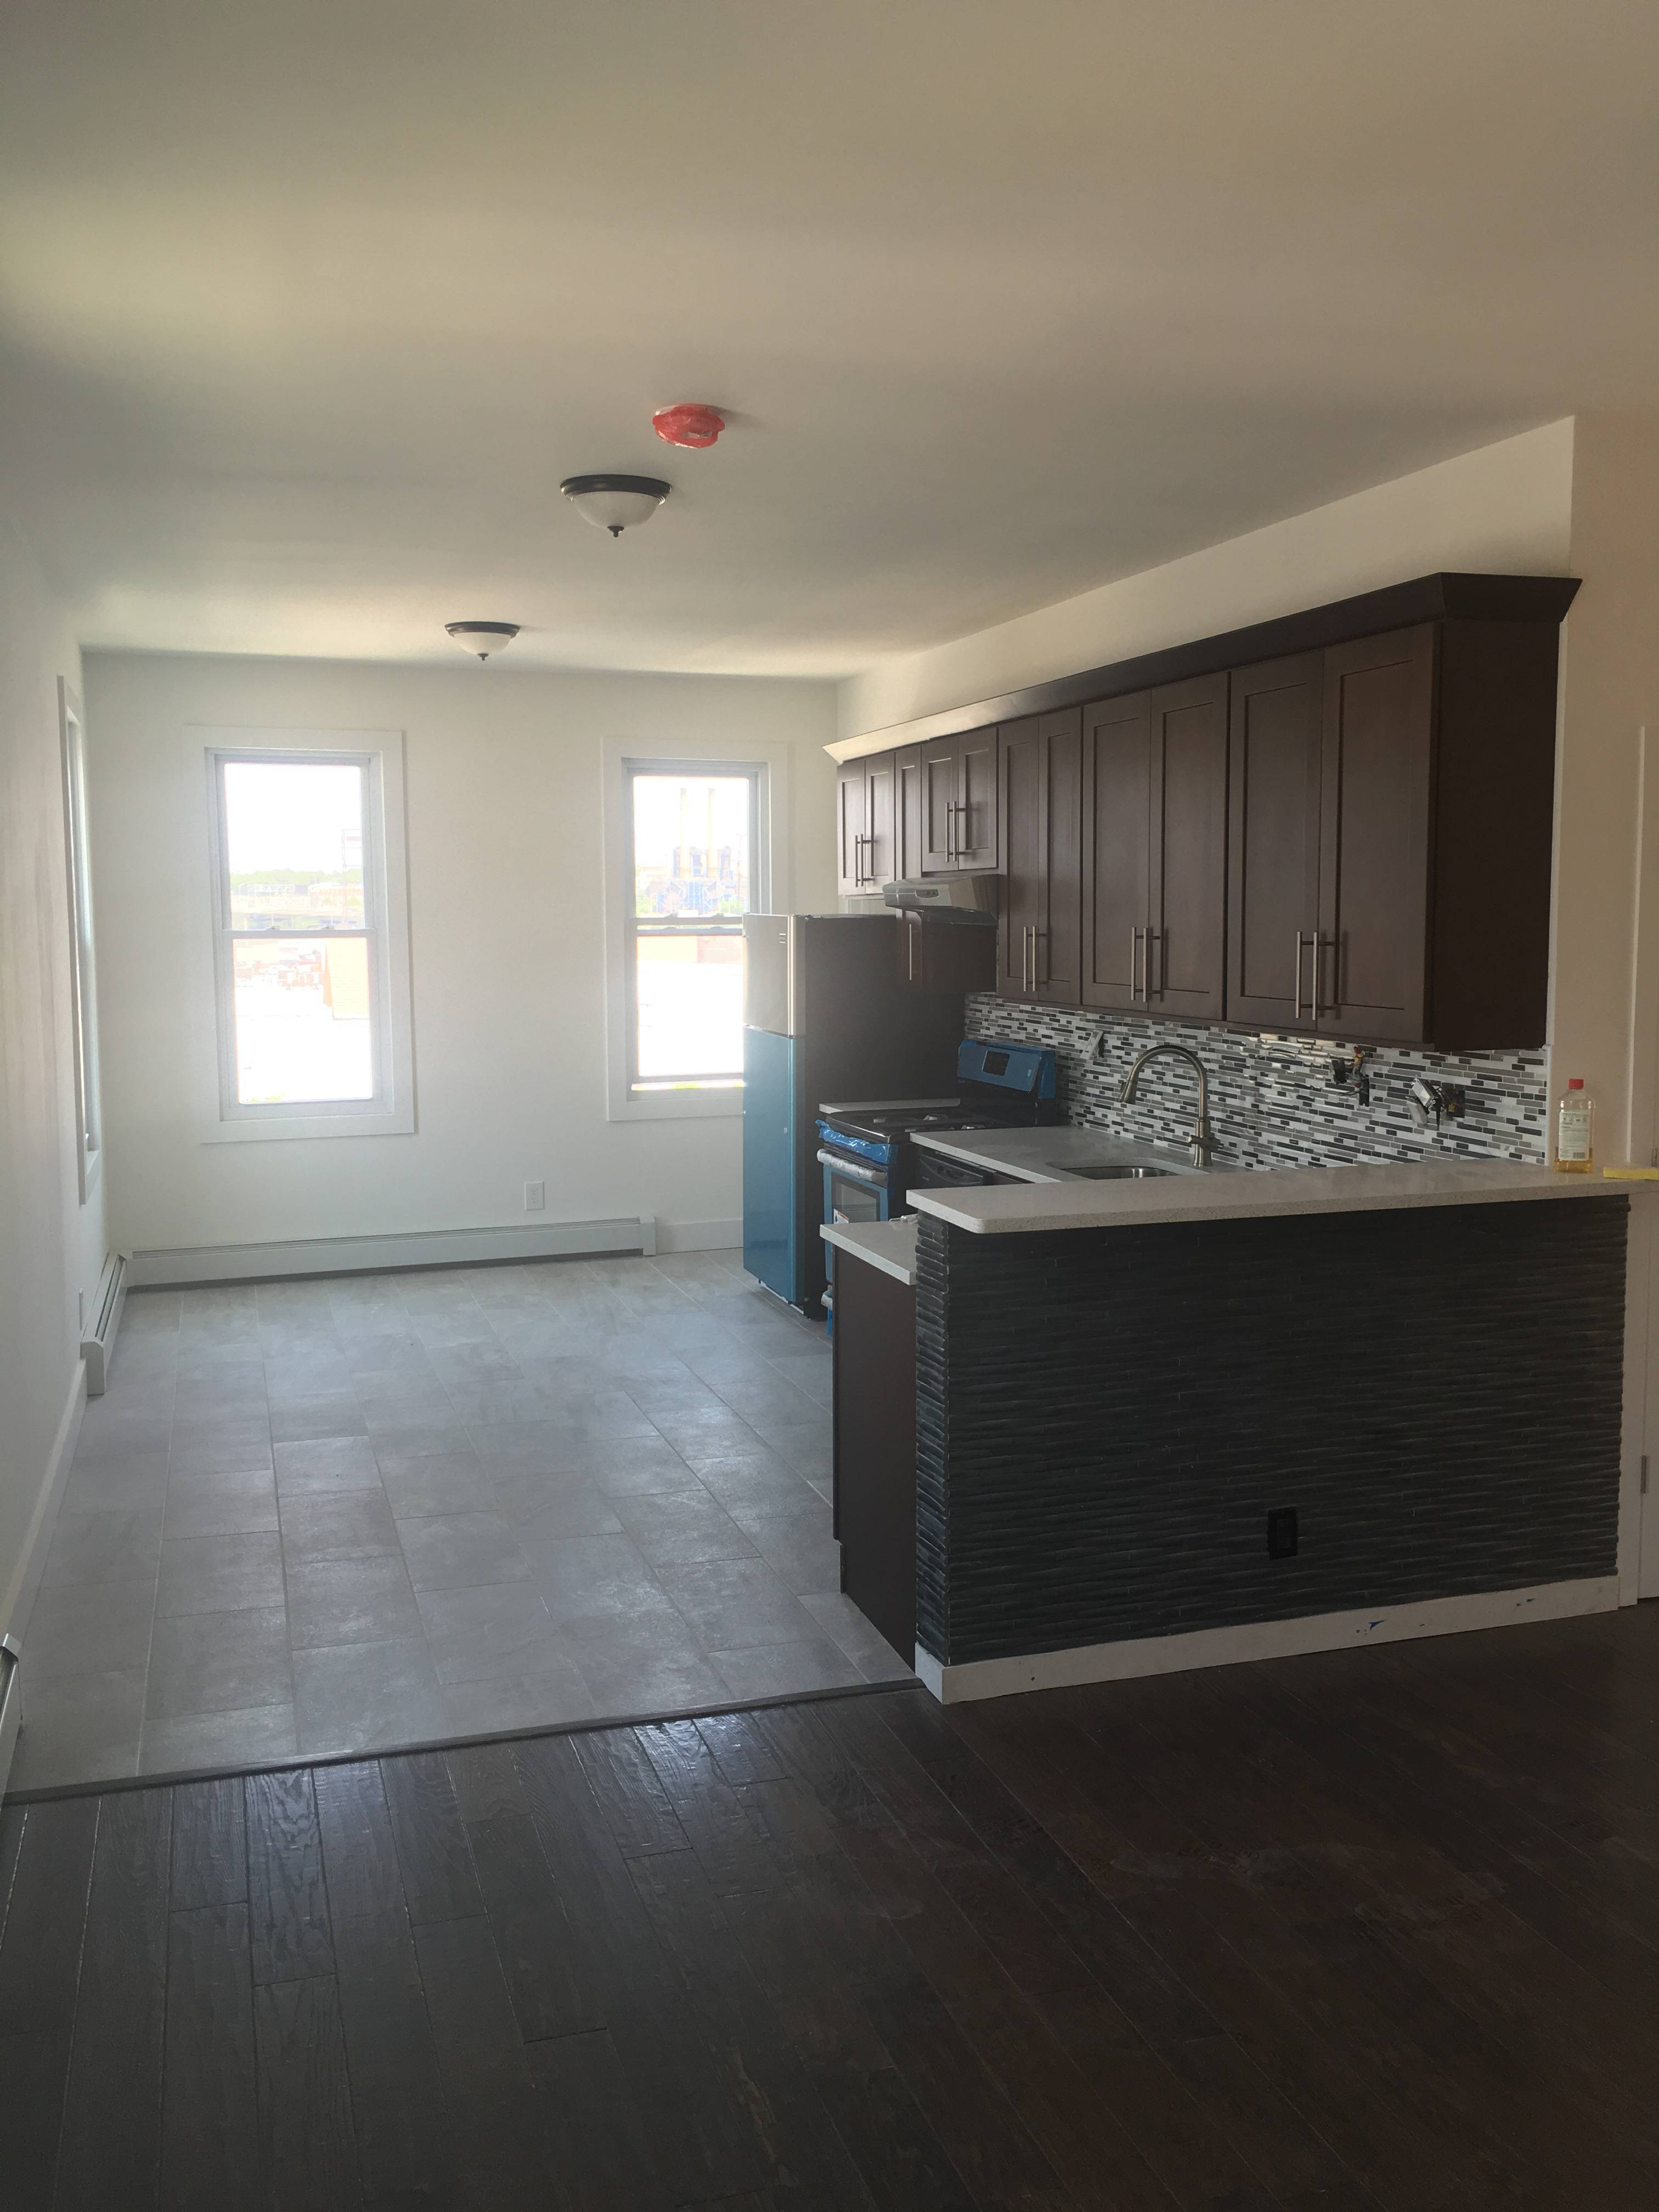 Newly Renovated 3-Bedroom Apt. Available July 1st!